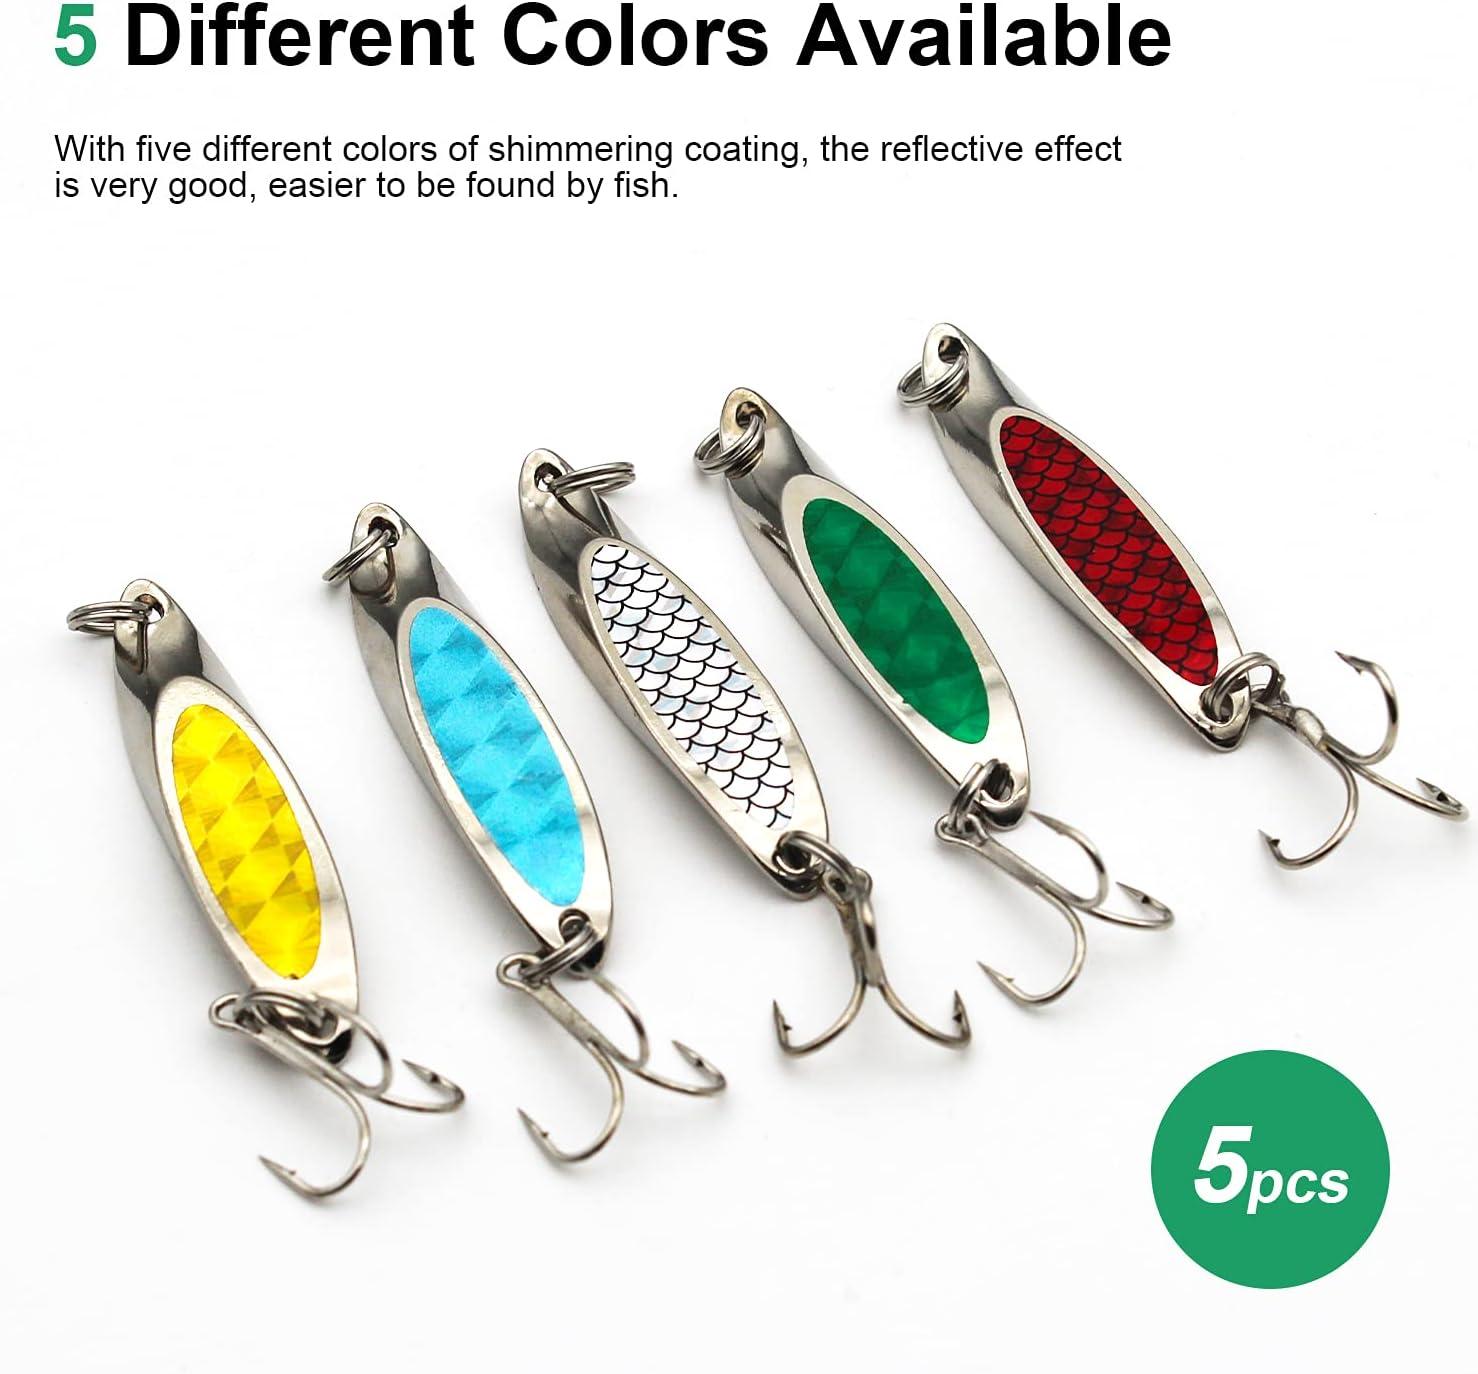 FishingPepo Fishing Spoons Lure, Trout Lures, Bass Lures, Spinning